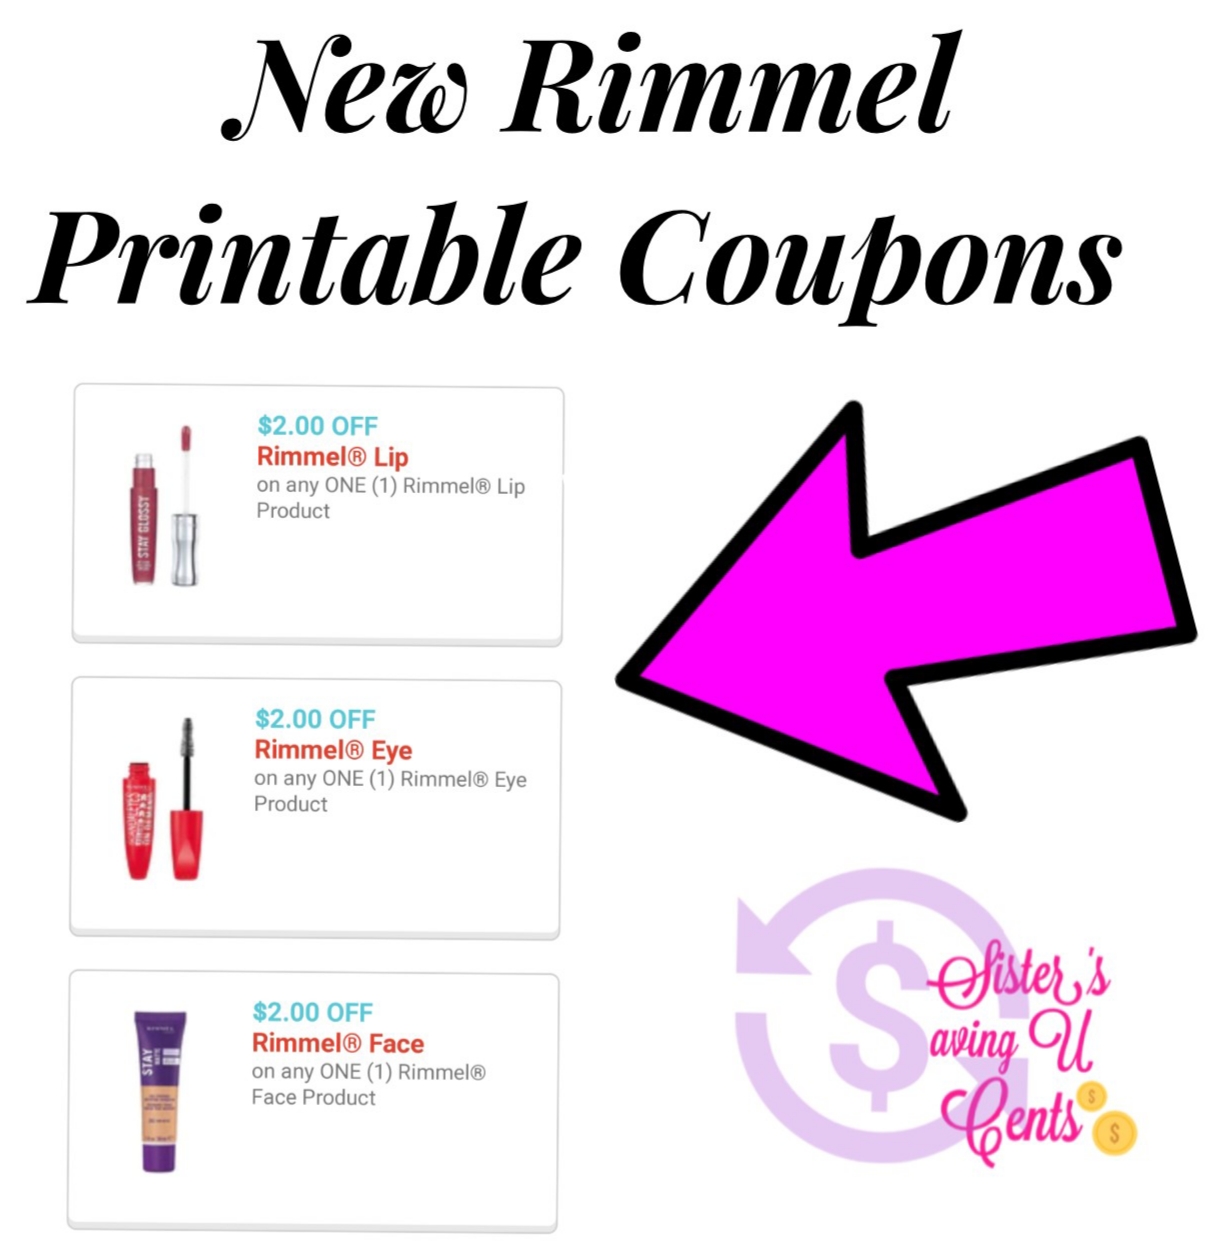 sisterssavingucents-new-rimmel-cosmetics-coupons